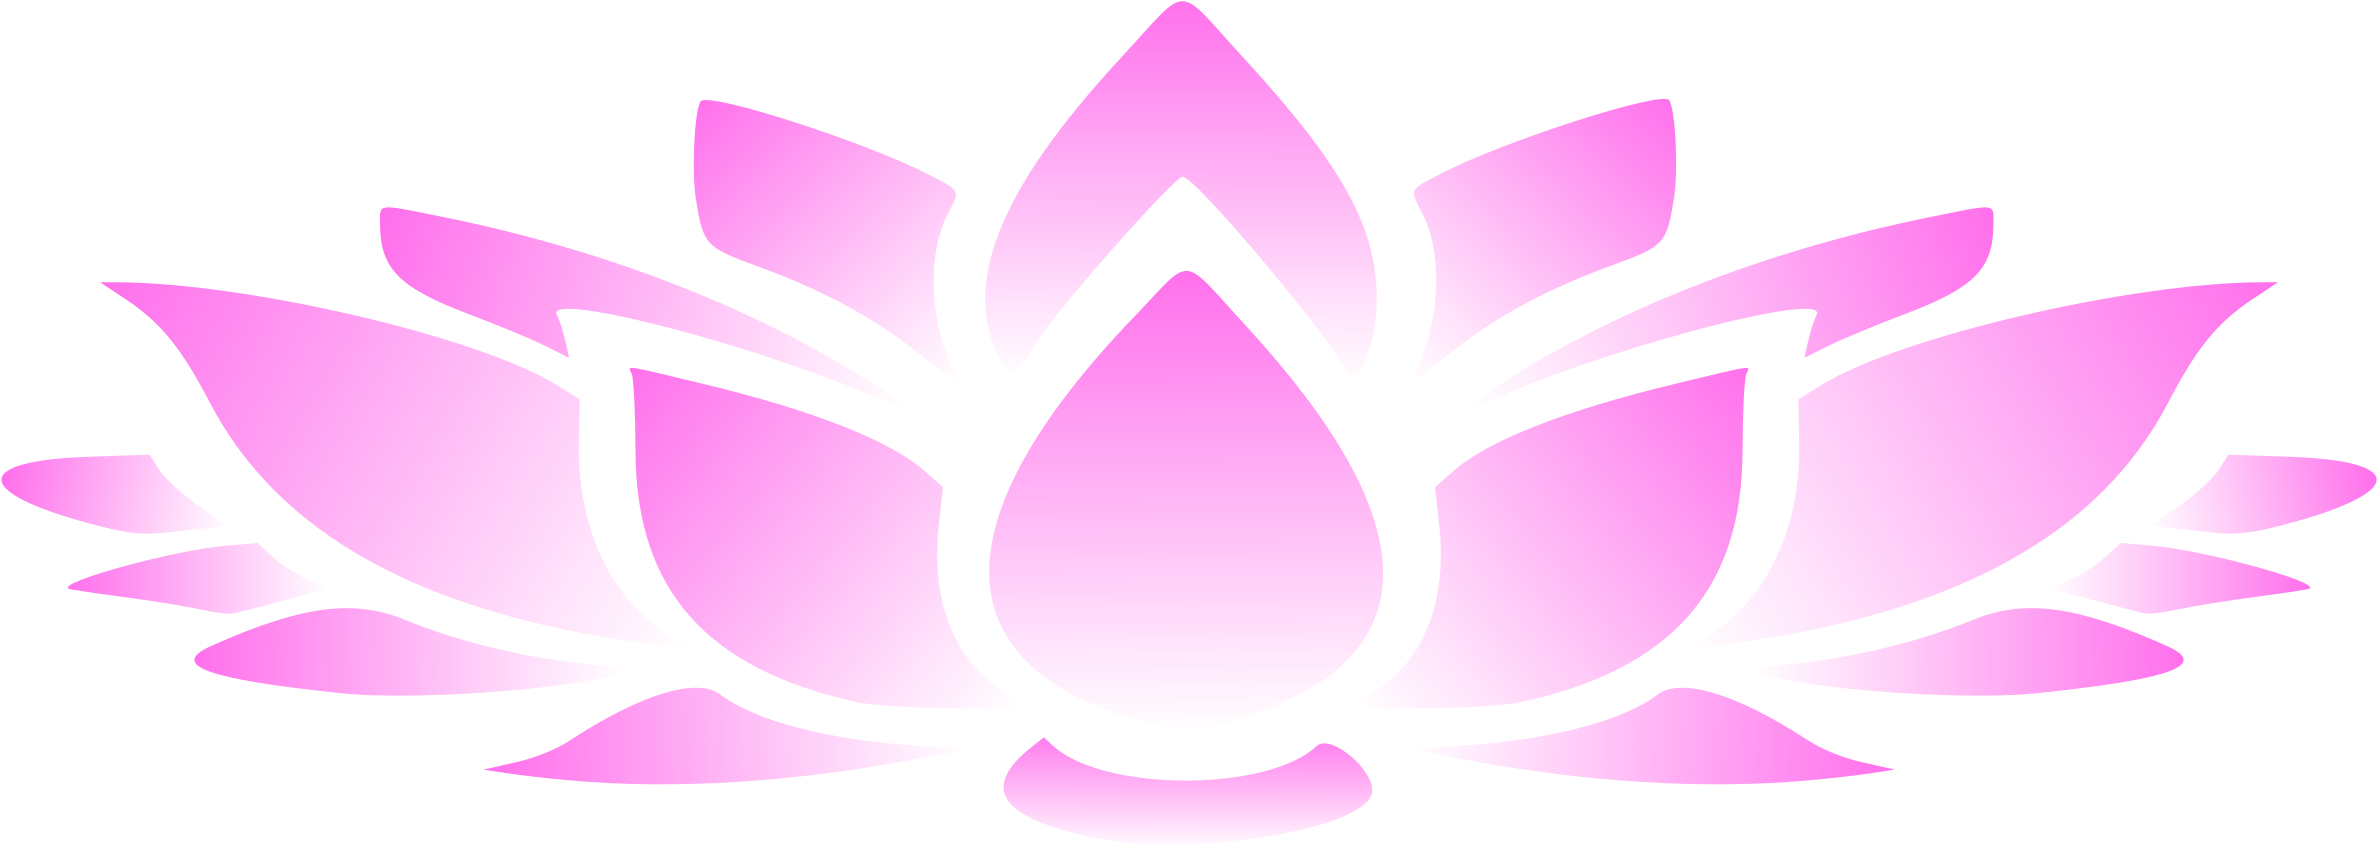 This Free Icons Png Design Of Lotus Flower 2 - Lotus Flower Graphic Png (2400x849)